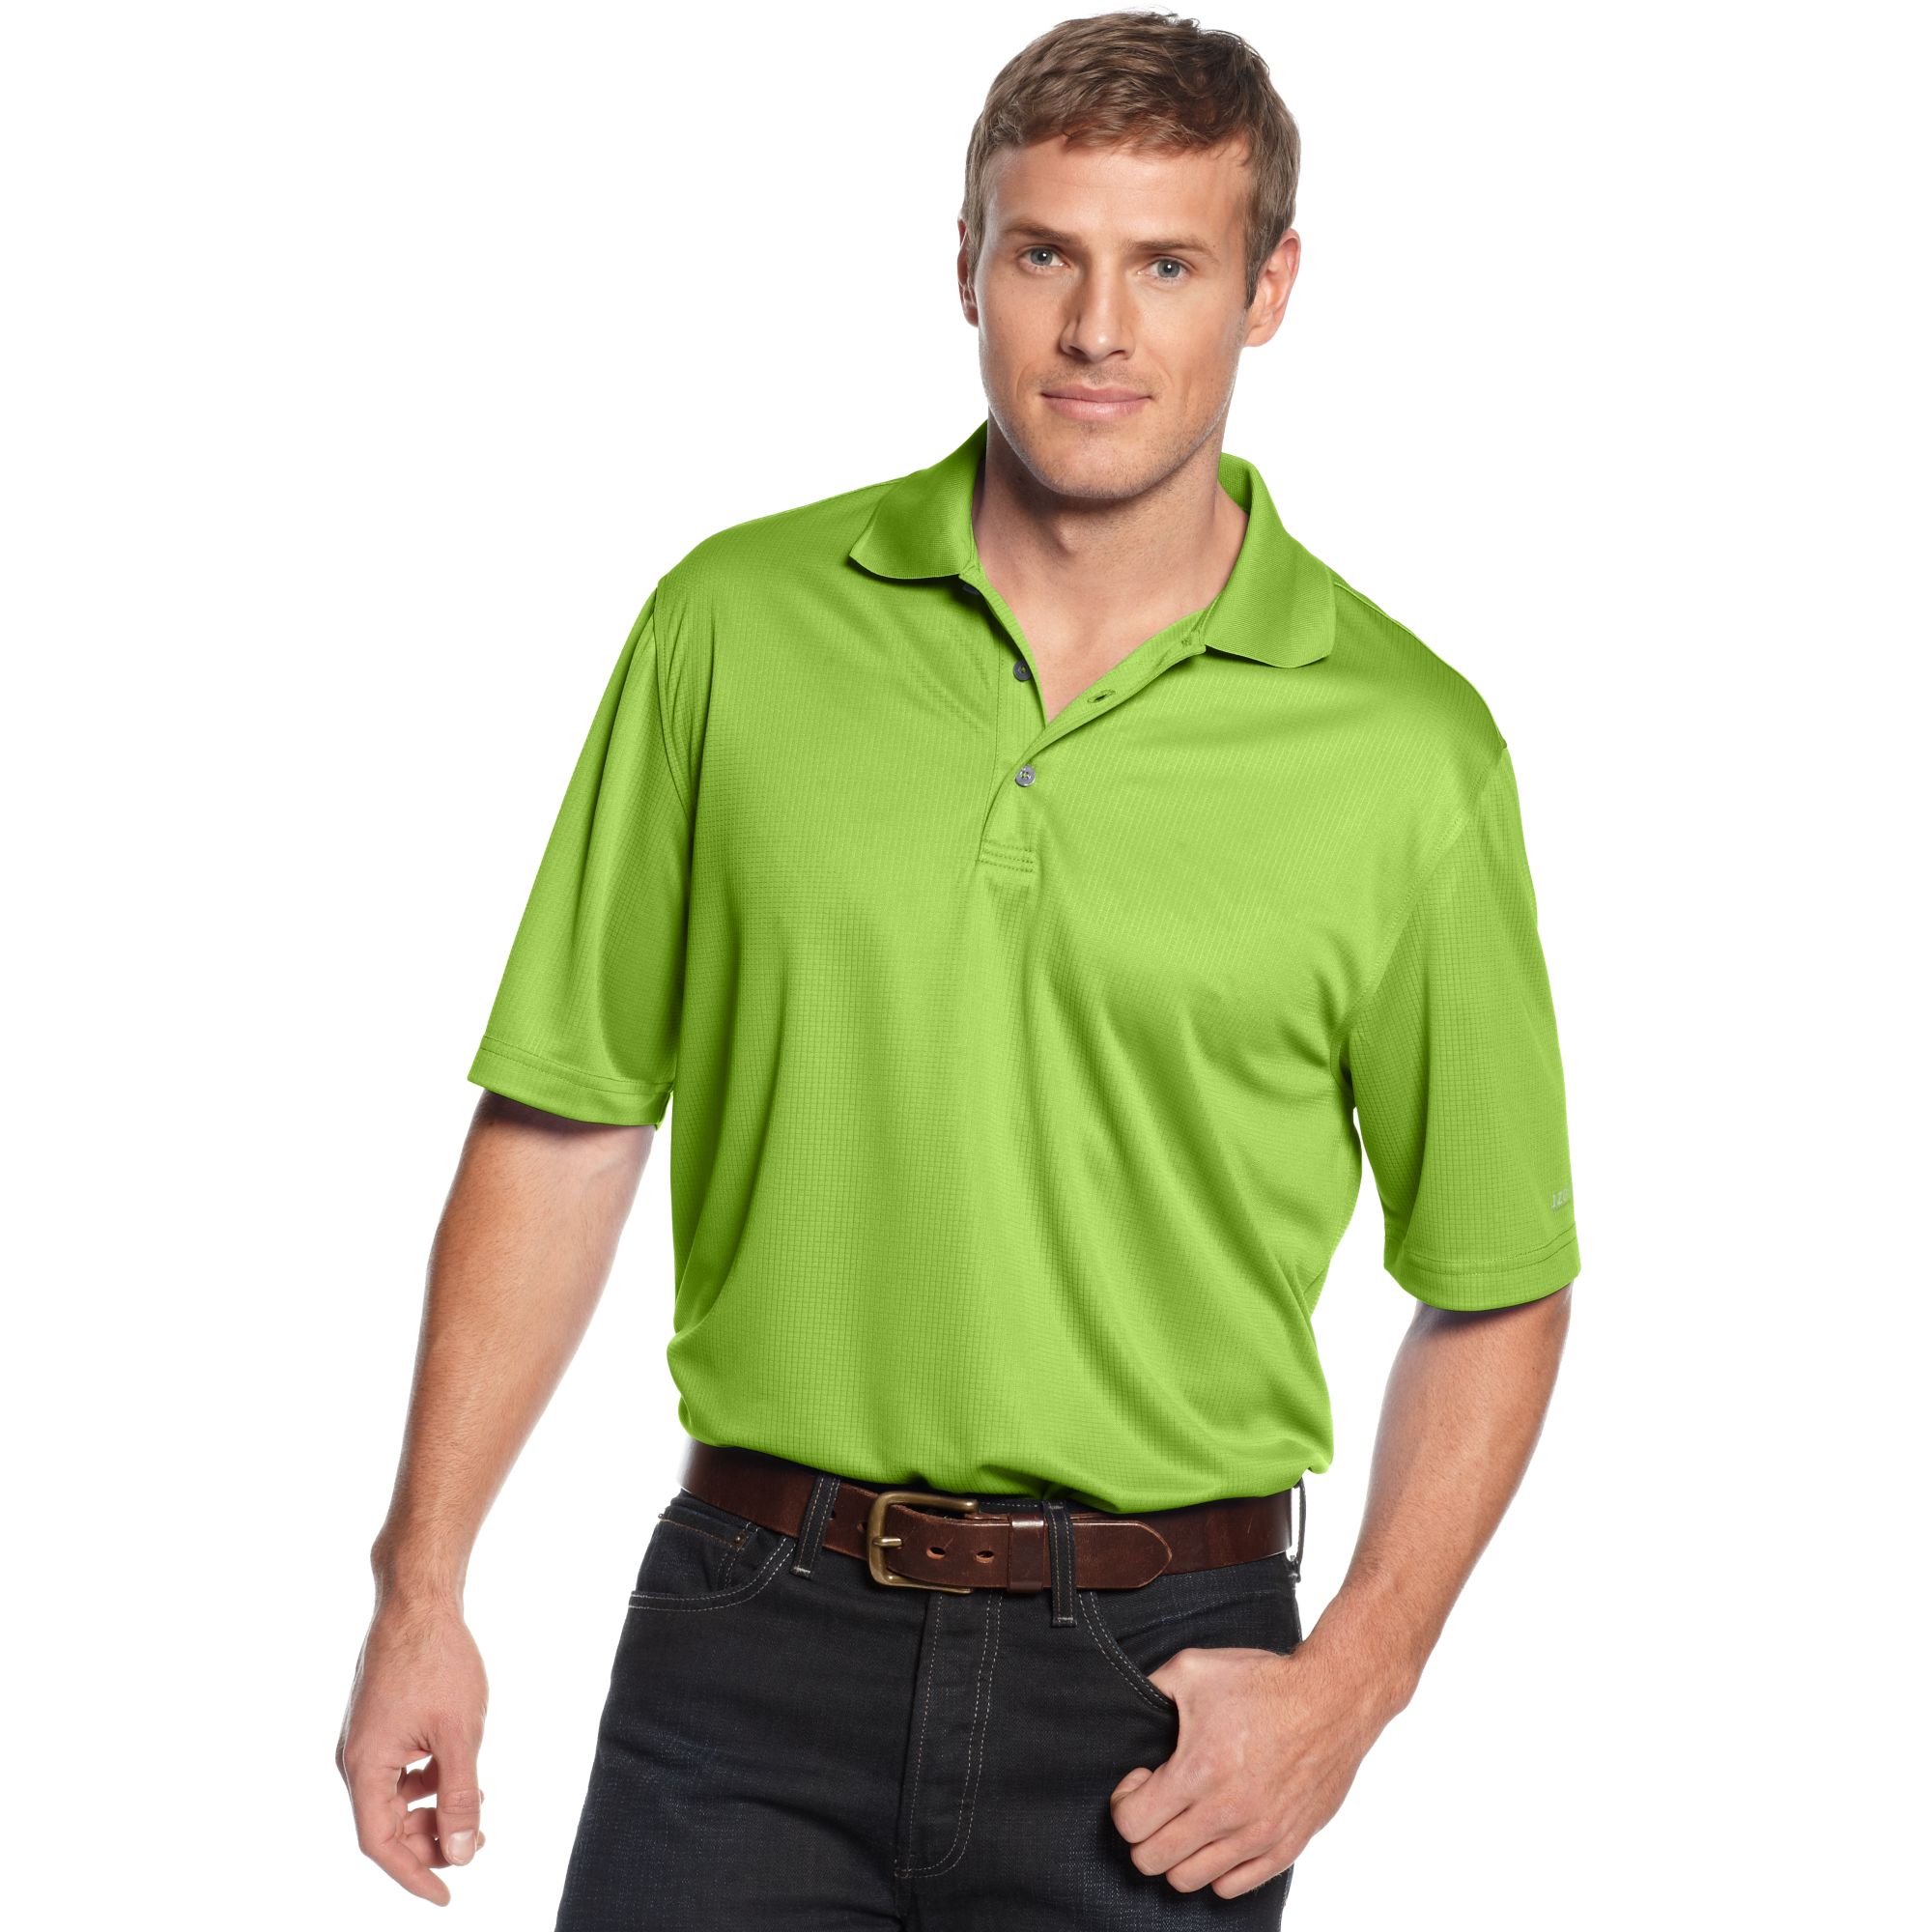 Lyst - Izod Uv Wicking Performance Polo Shirt in Green for Men